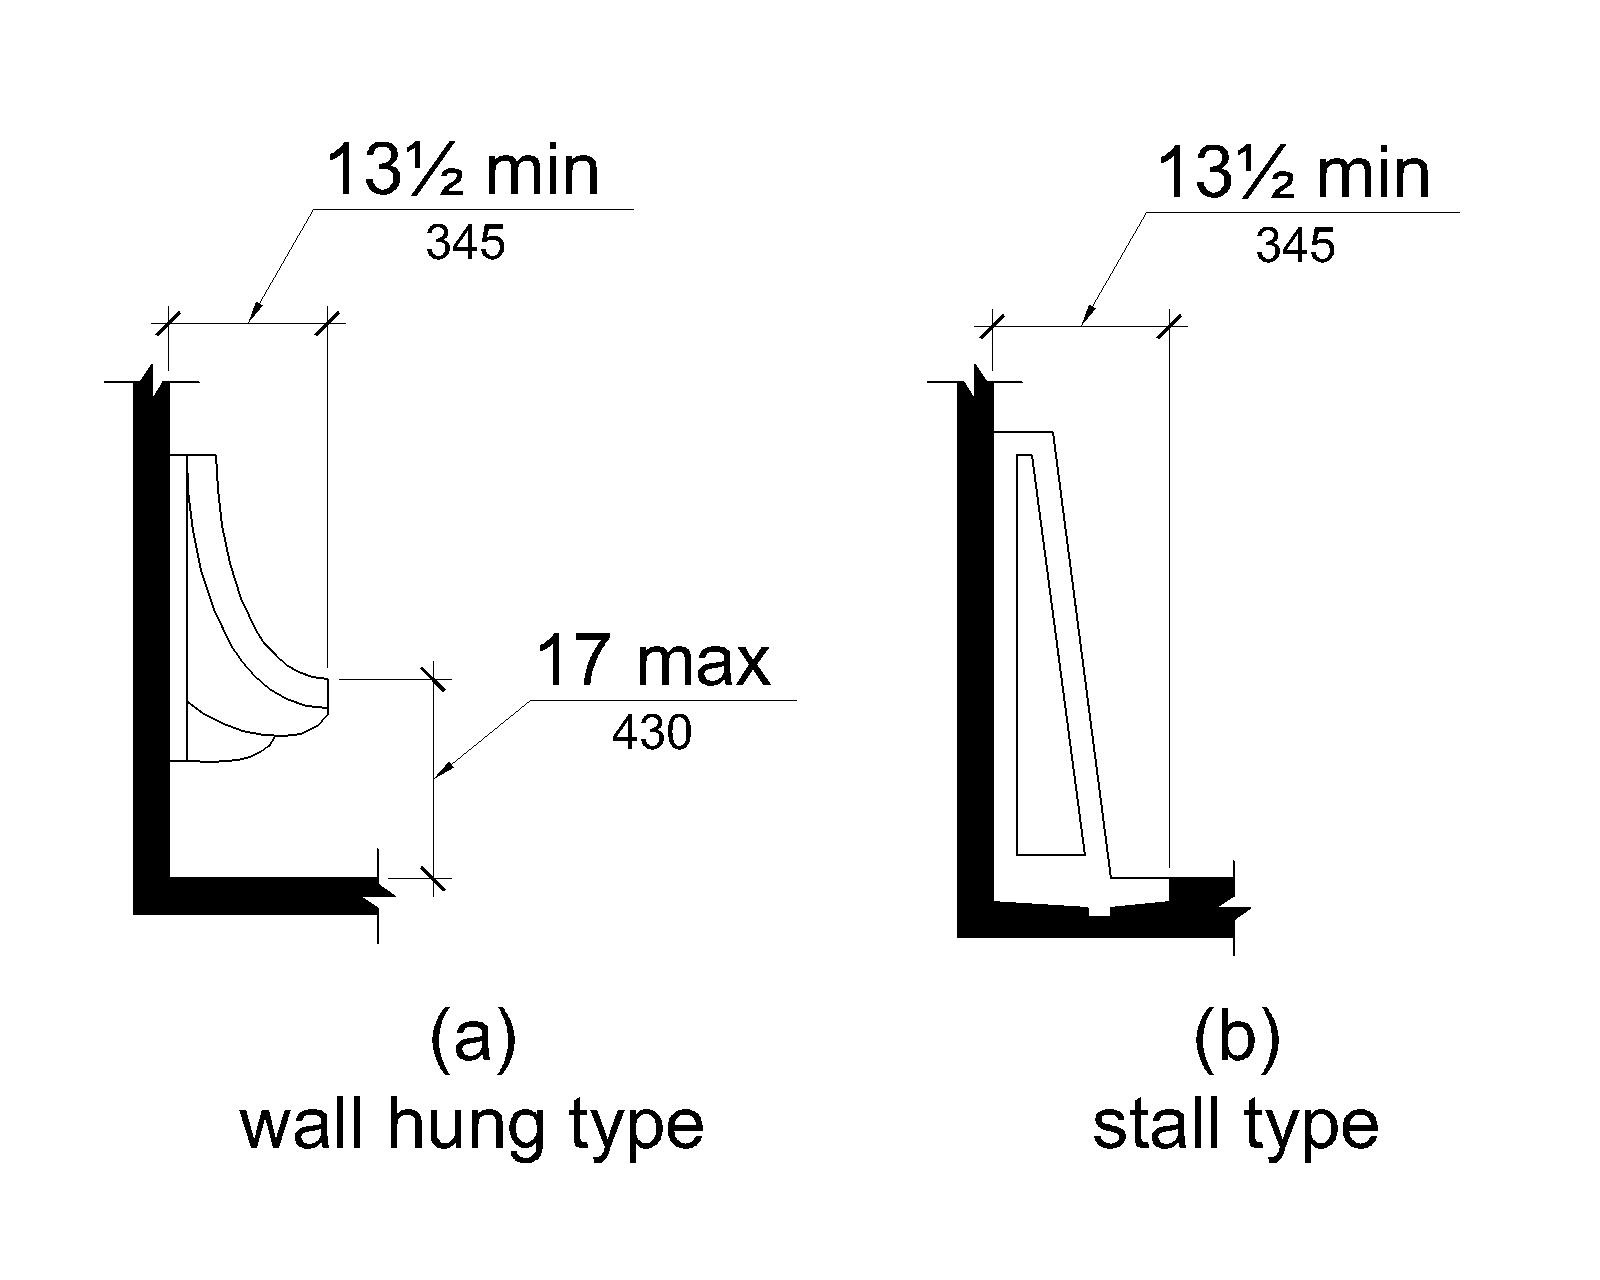 Figure (a) is an elevation drawing of a wall hung type having the urinal rim 17 inches (430 mm) maximum above the deck surface with a minimum depth of 13½ inches (350 mm) measured from the outer face of the rim to the back of the fixture. Figure (b) is an elevation drawing of a stall (deck surface mounted) type having a minimum depth of 13½ inches (350 mm) measured from the outer face of the rim to the back of the fixture.